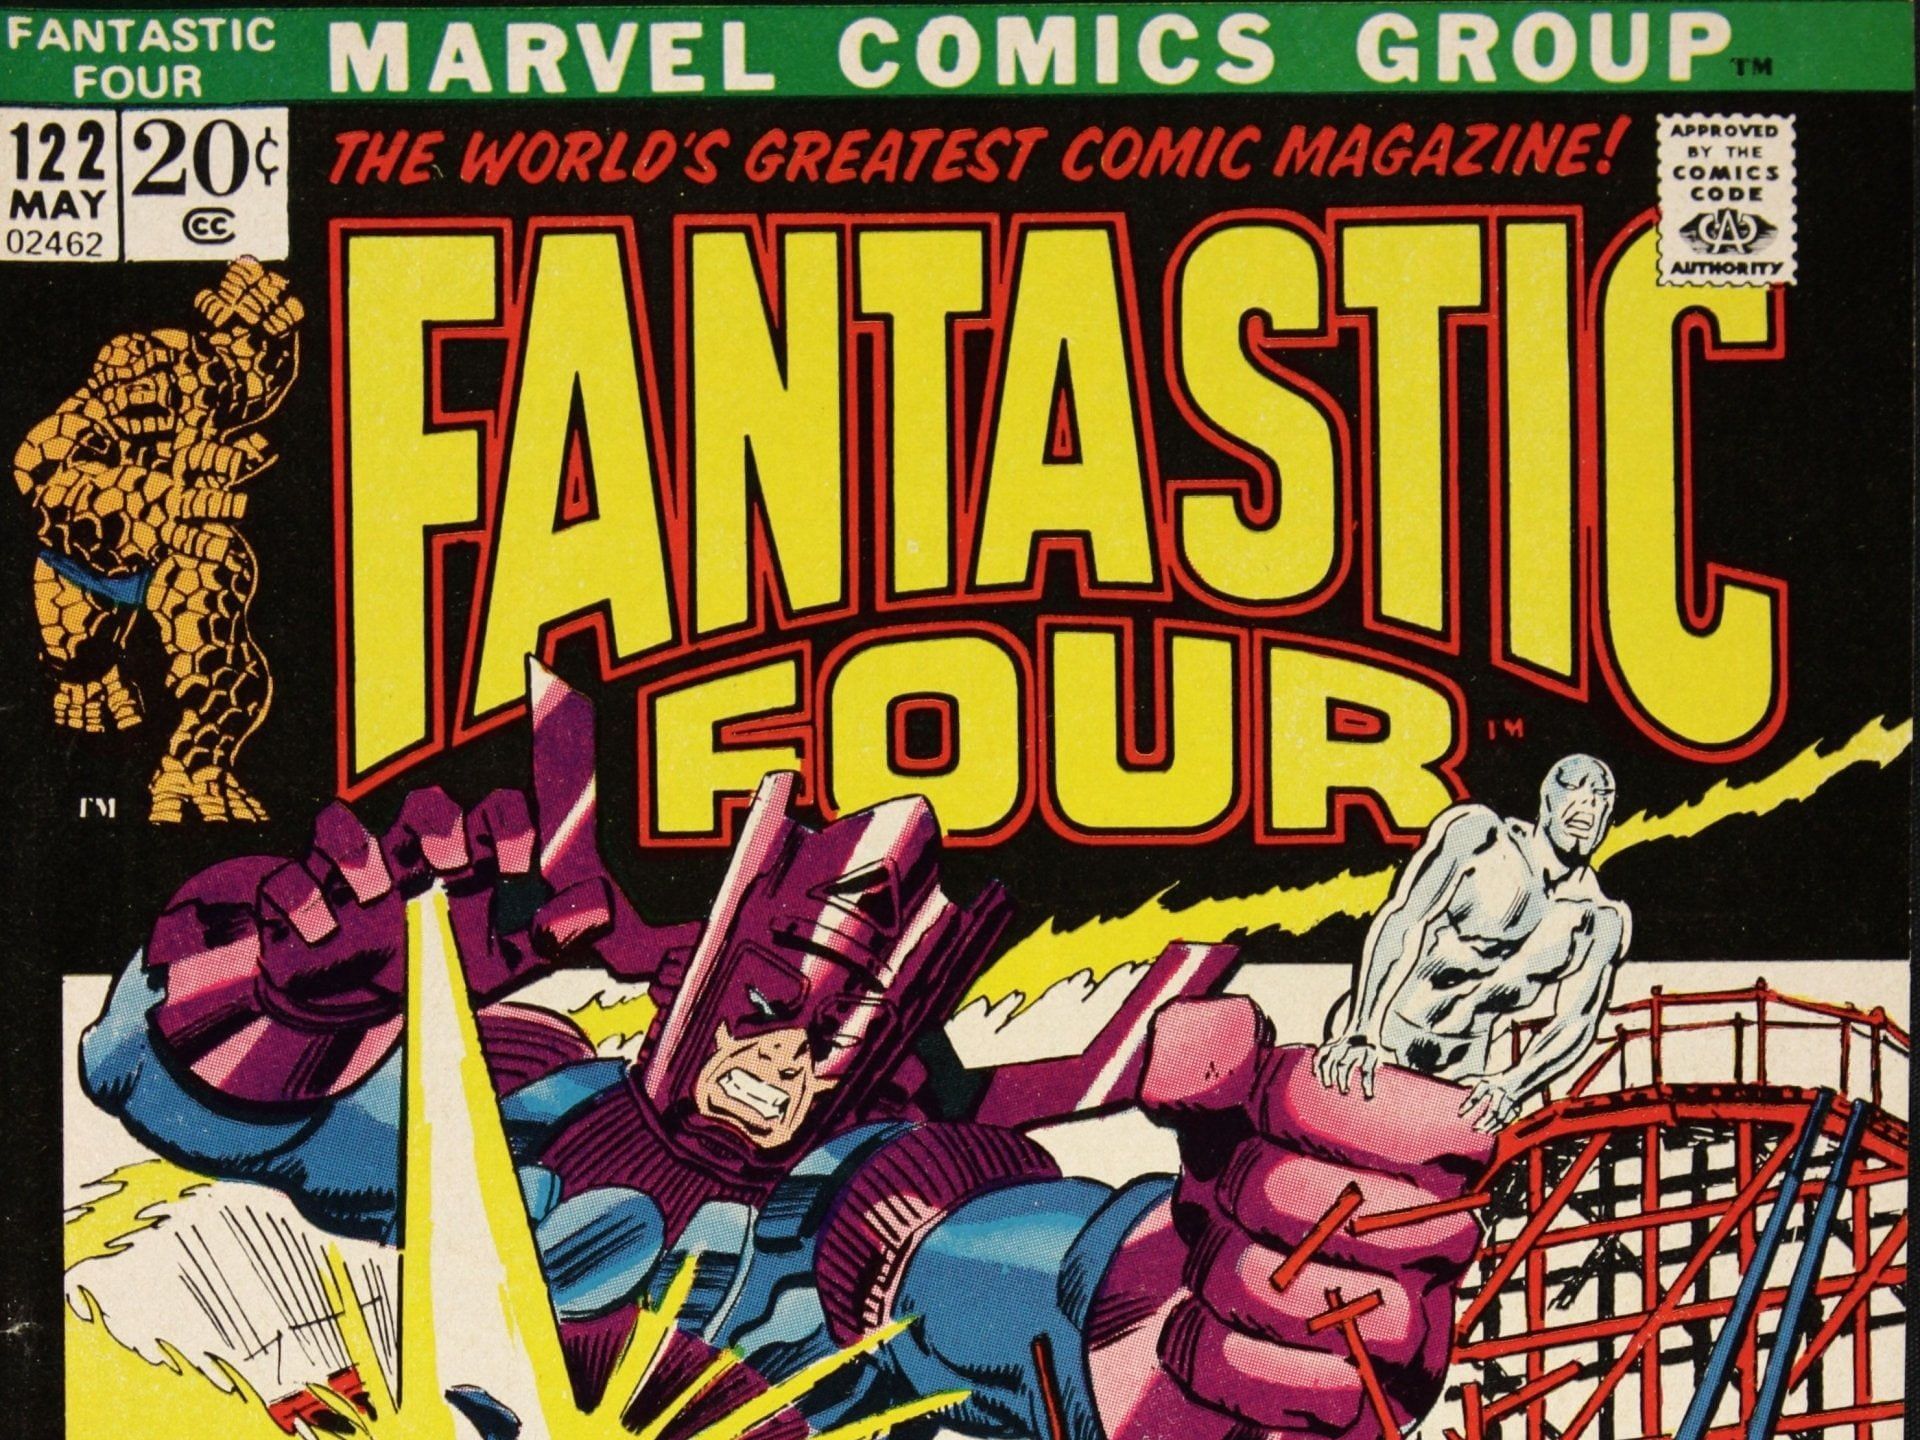 Fantastic Four: The Galactus Saga, crafted by the legendary duo of Stan Lee and Jack Kirby, is an indispensable Marvel Comics. (Image Via Marvel)